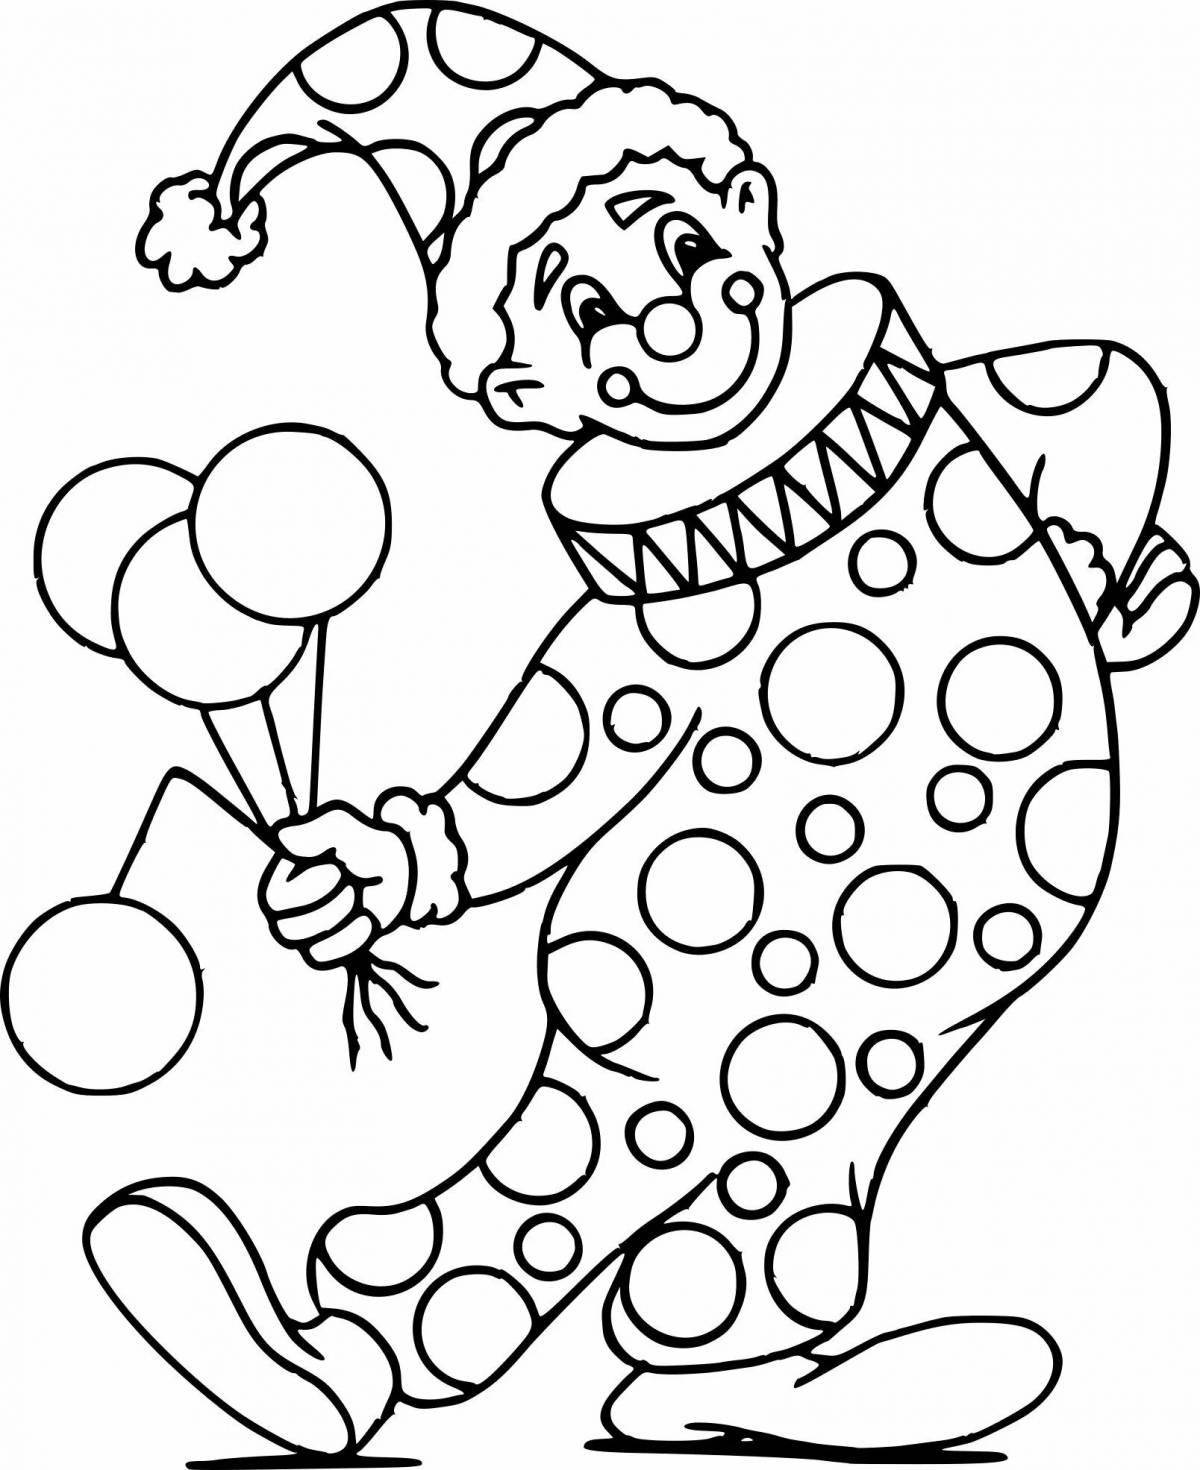 Colorful clown coloring page